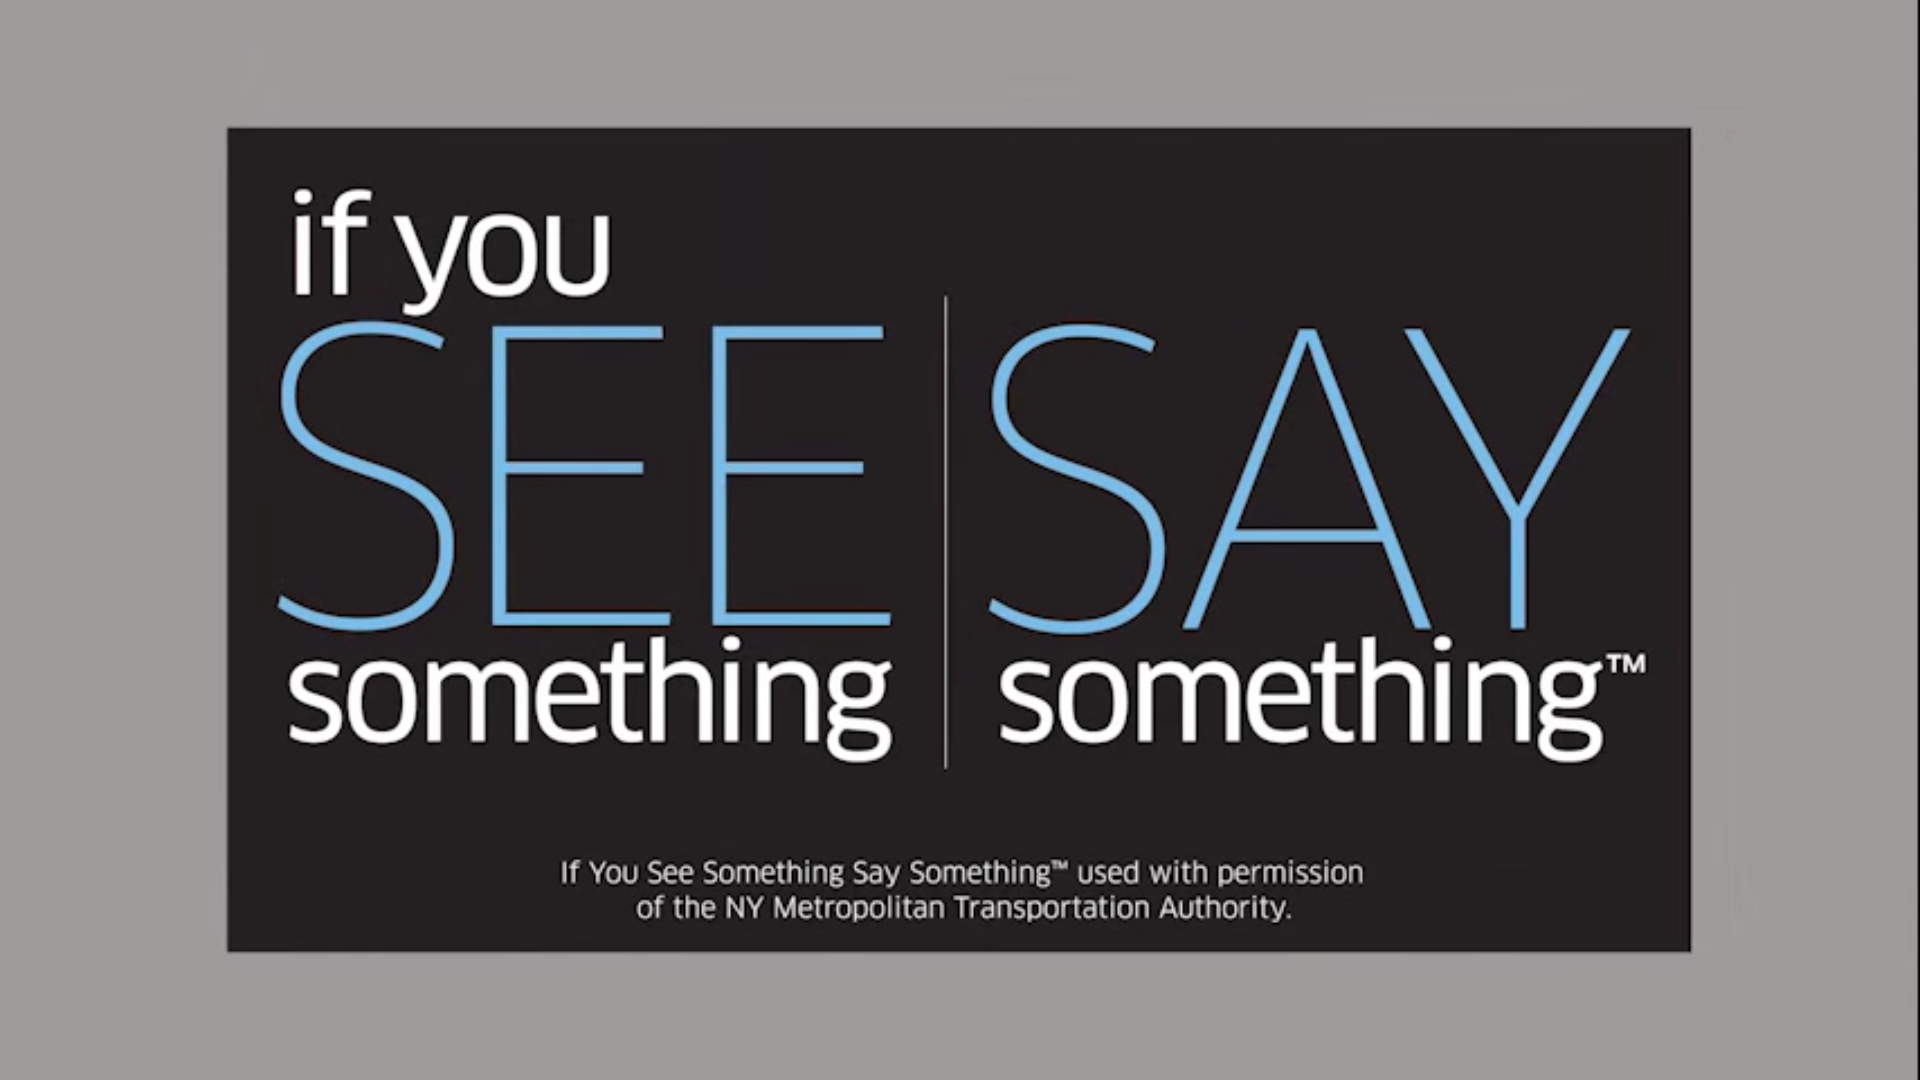 If you see something, say something poster